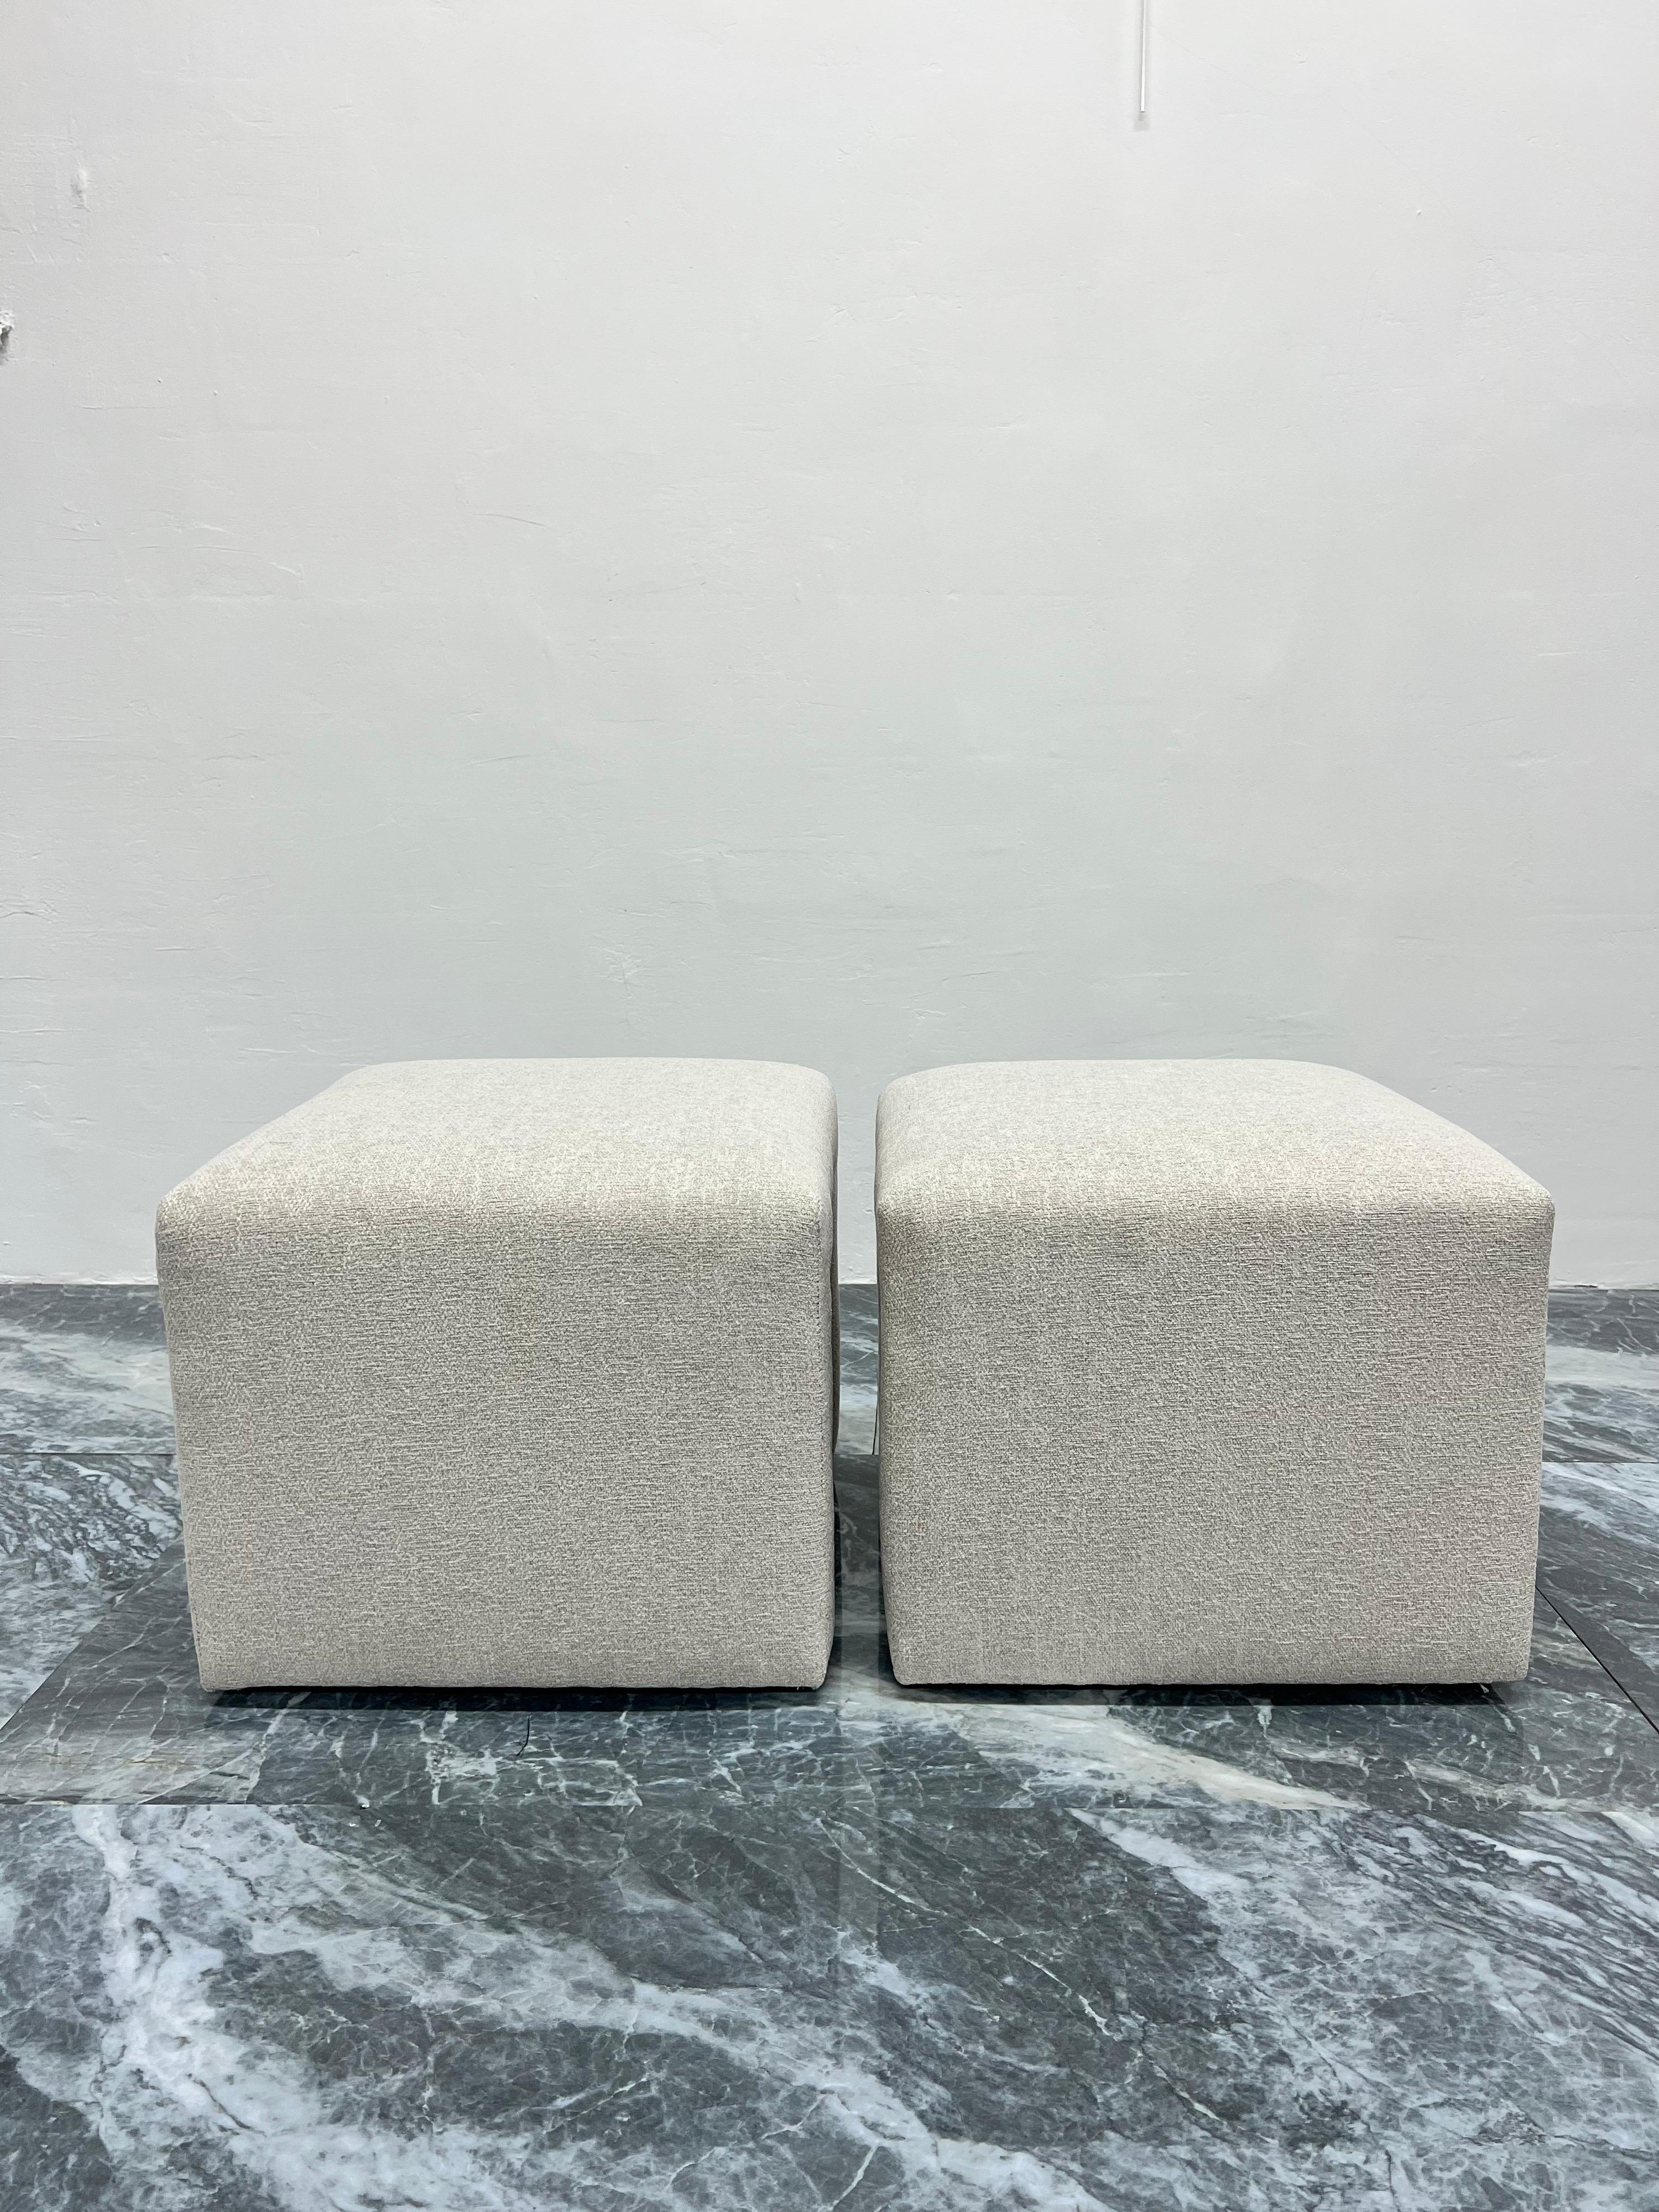 American Mid-Century Modern Upholstered Waterfall Stools or Benches, 1970s, a Pair For Sale